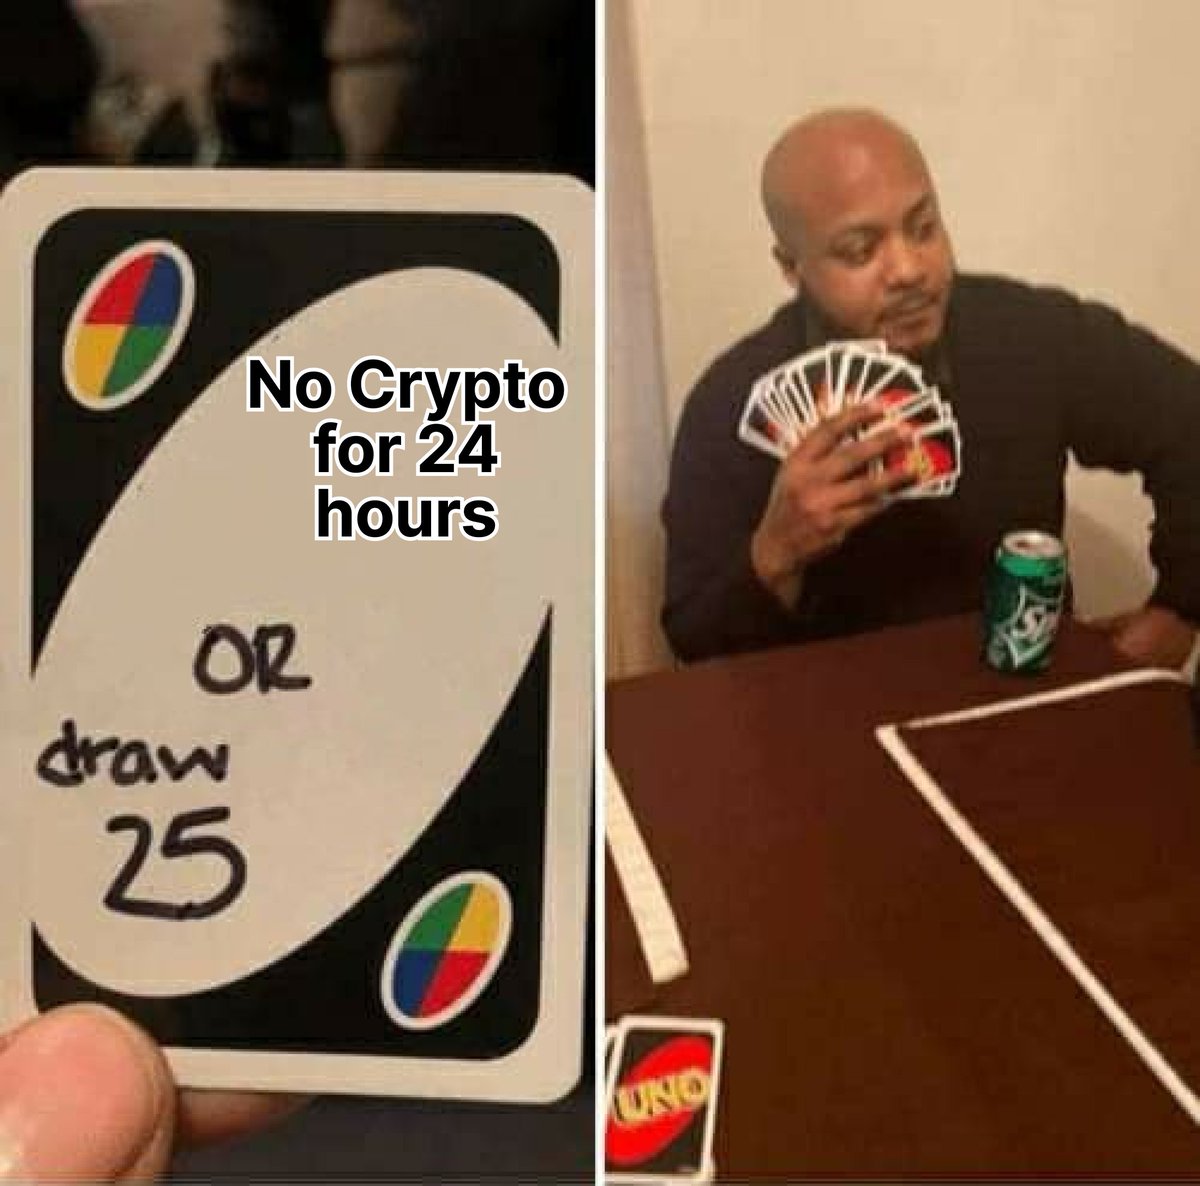 All in for #crypto